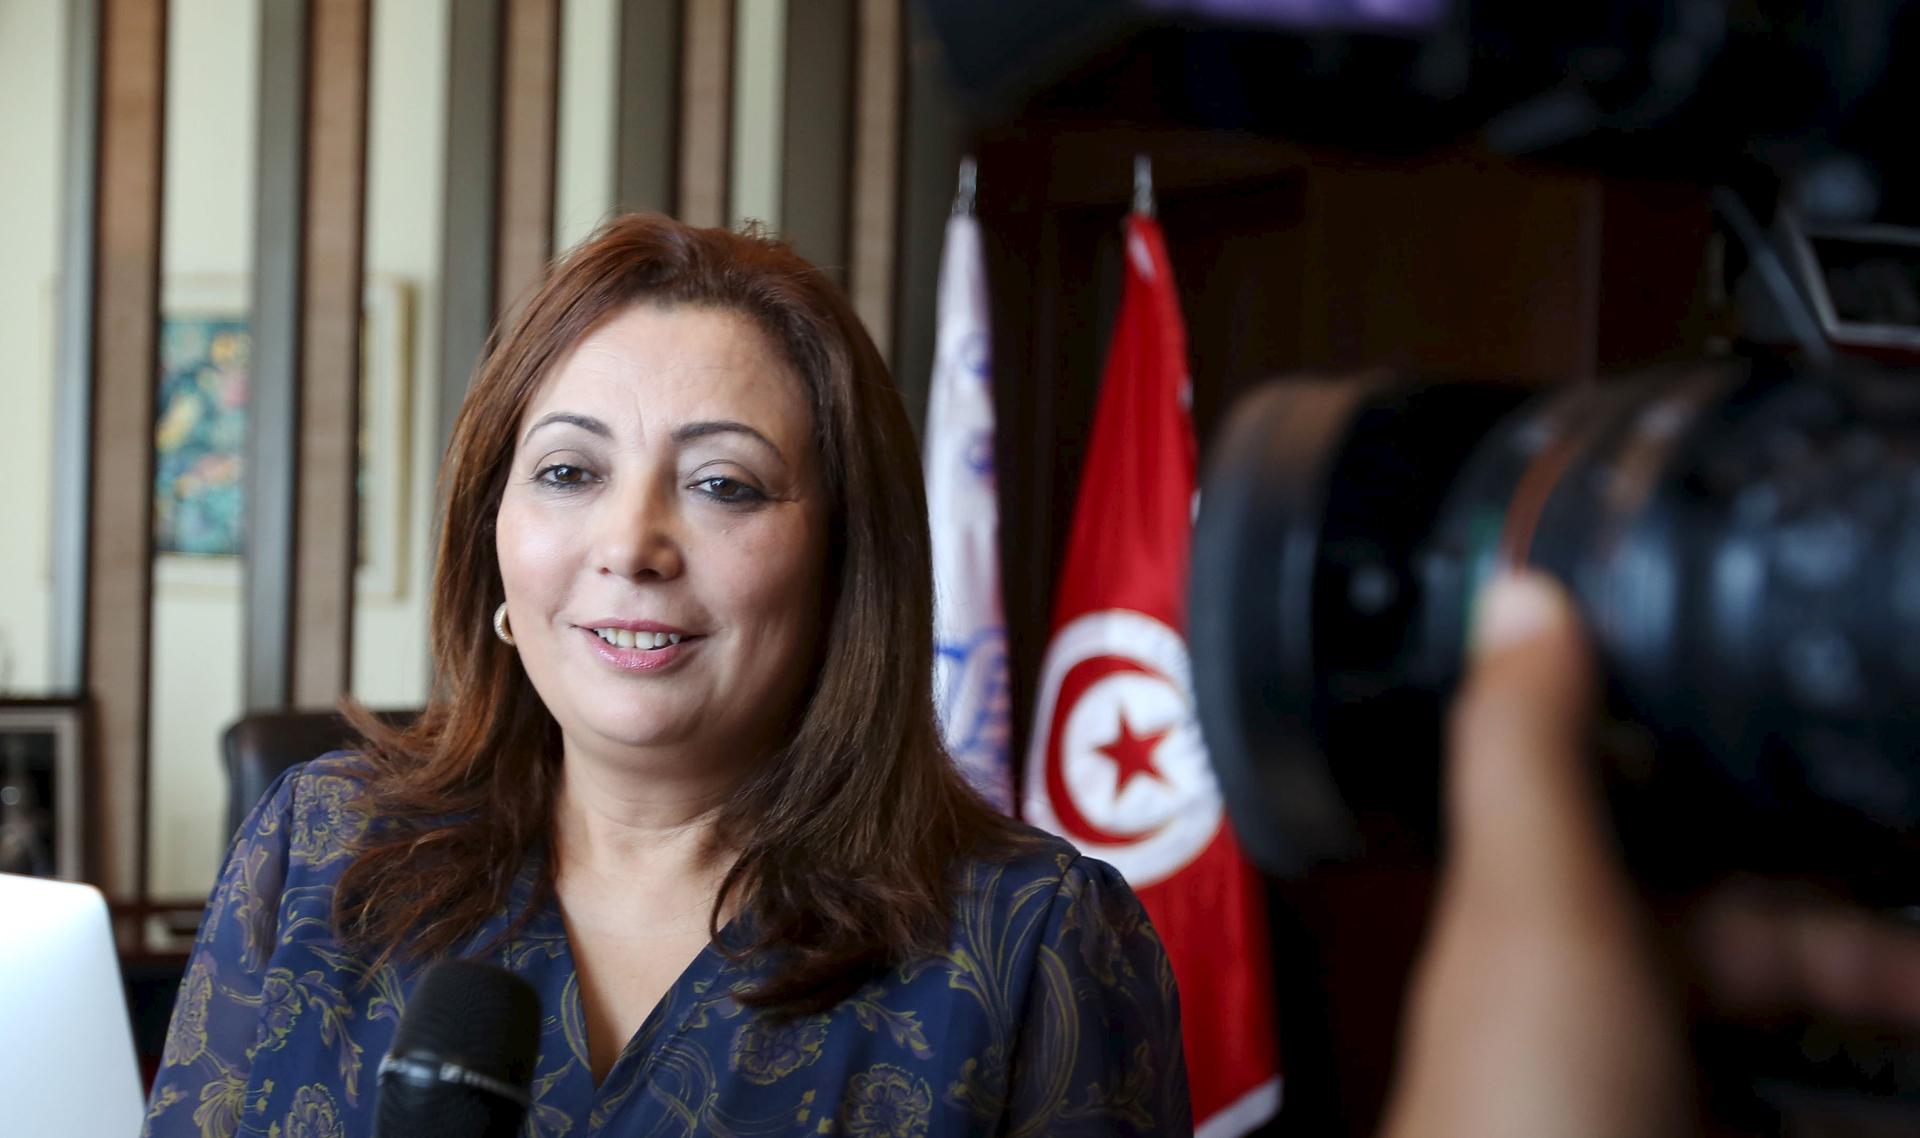 Wided Bouchamaoui, president of Tunisia's Employers' Organisation (UTICA) and a member of Tunisia's National Dialogue Quartet, talks to journalists in her office in Tunis, Tunisia October 9, 2015.